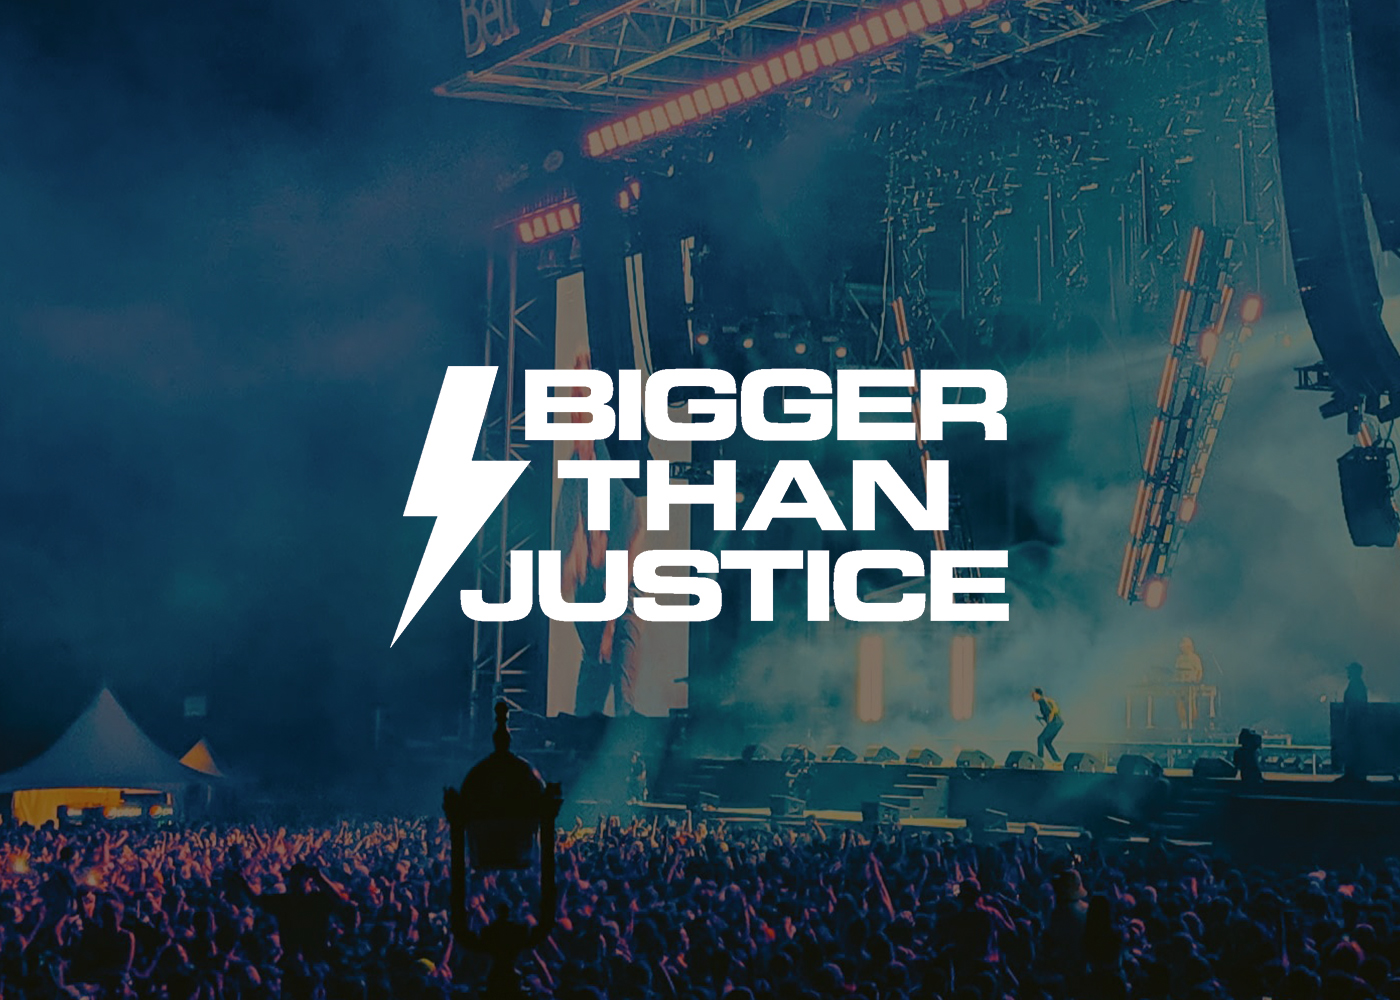 Poster and collateral designs for Bigger Than Justice, a fictional charity music festival featuring hip-pop artists, Lil baby, Kanye West and J-cole to support the Black Lives Matter.